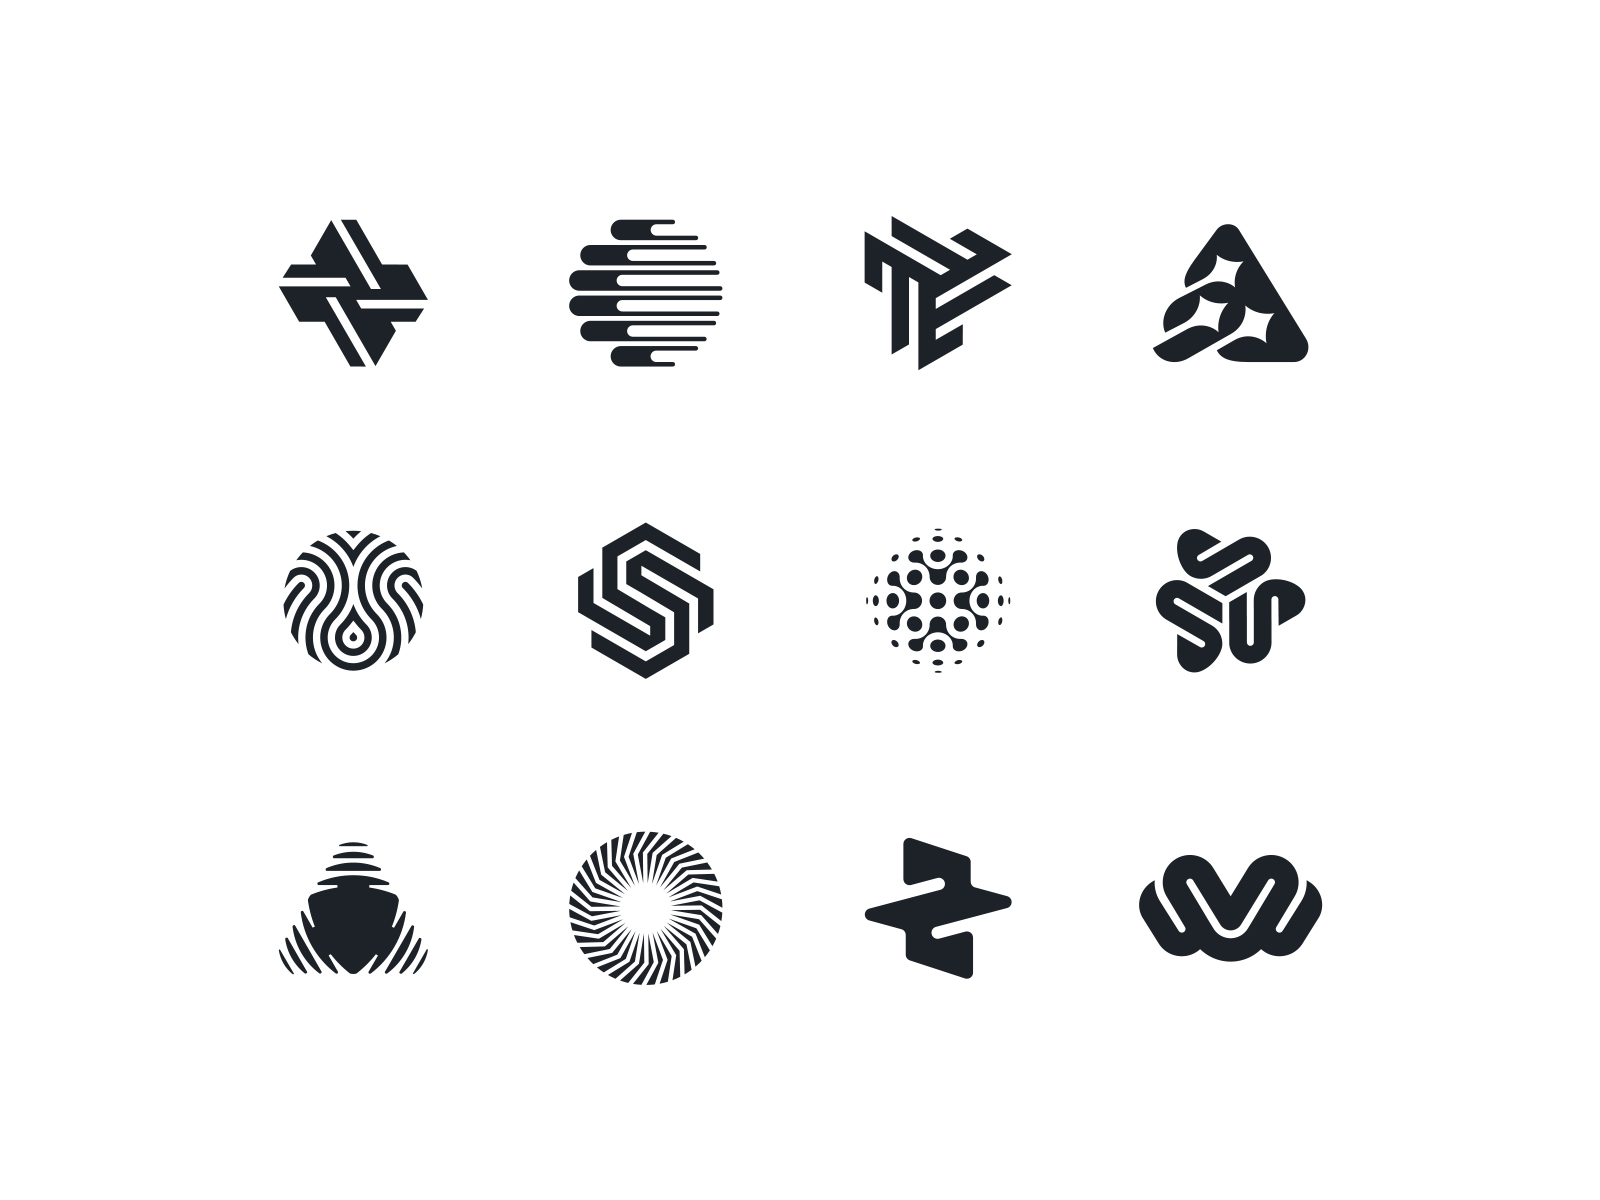 Abstract icons by Sava Stoic on Dribbble